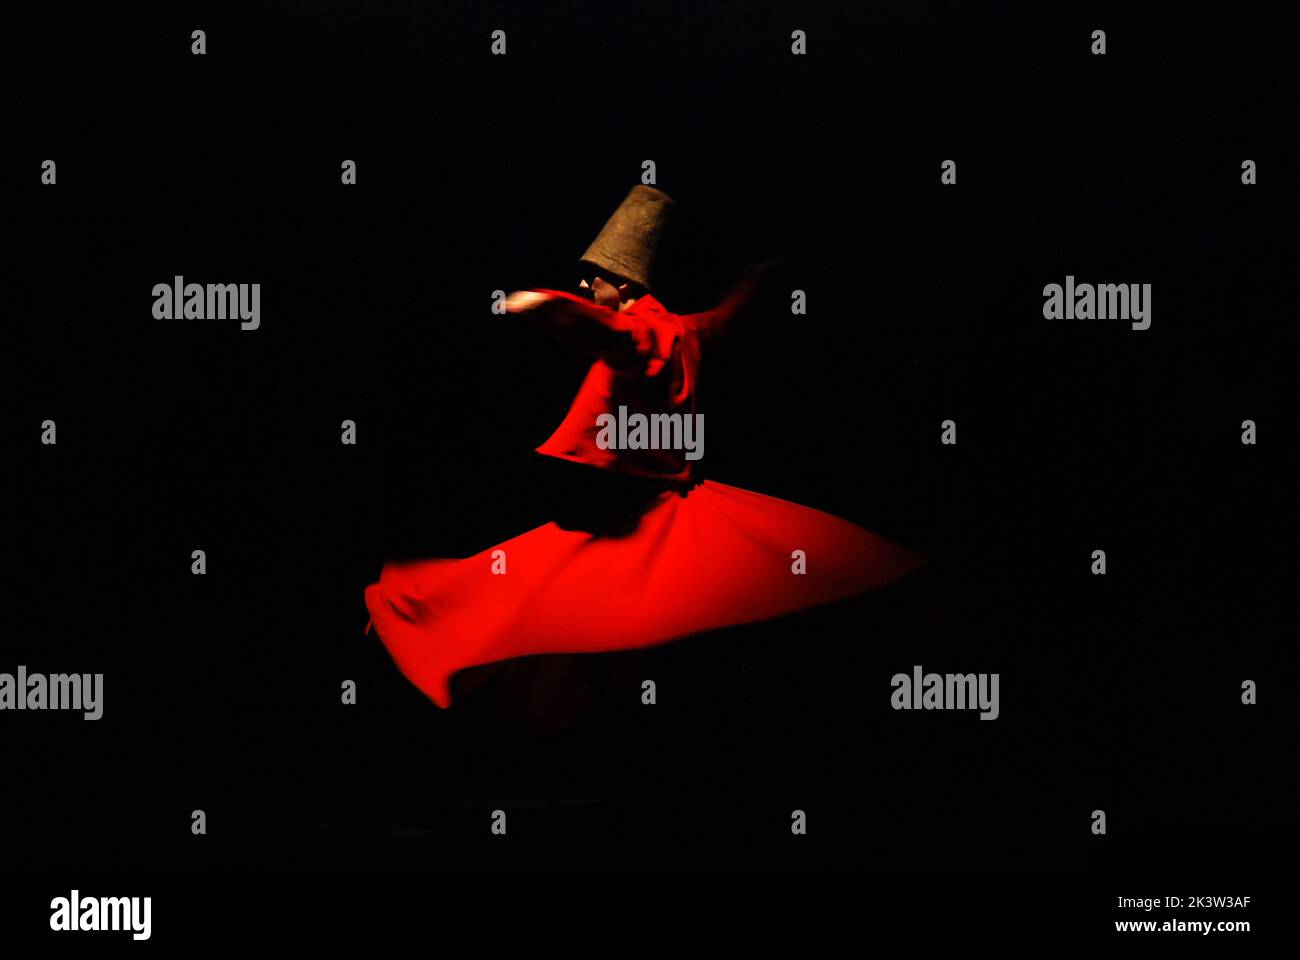 A person in a red dervish costume spinning on a black background Stock Photo